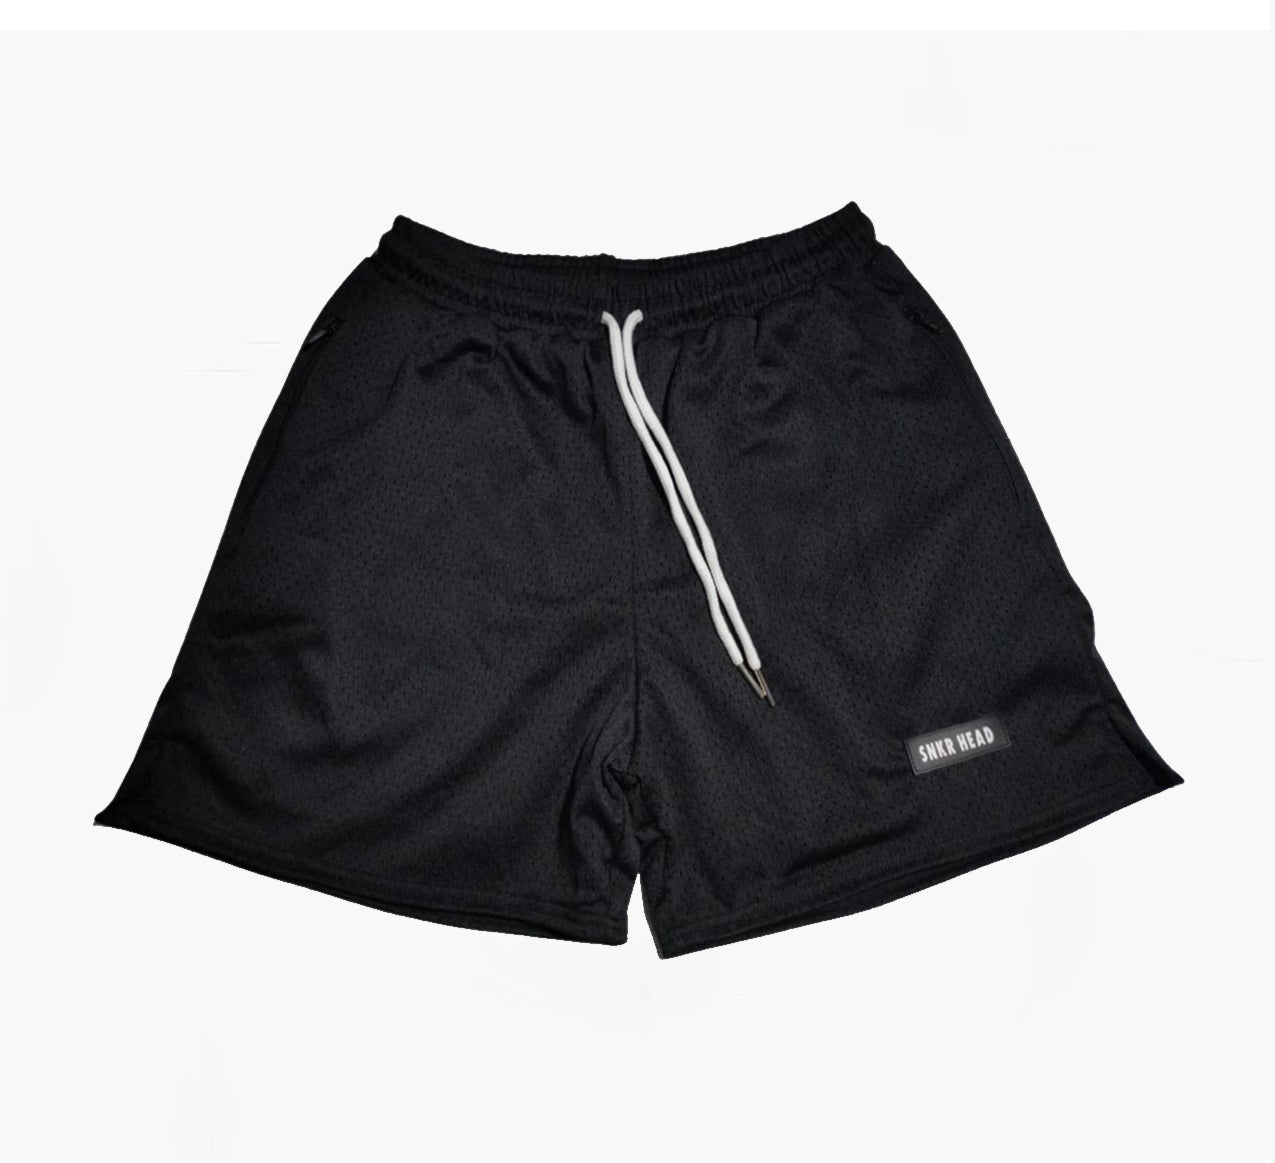 Cut & Sew Everyday SNKR HEAD Black Rubber Patch Shorts